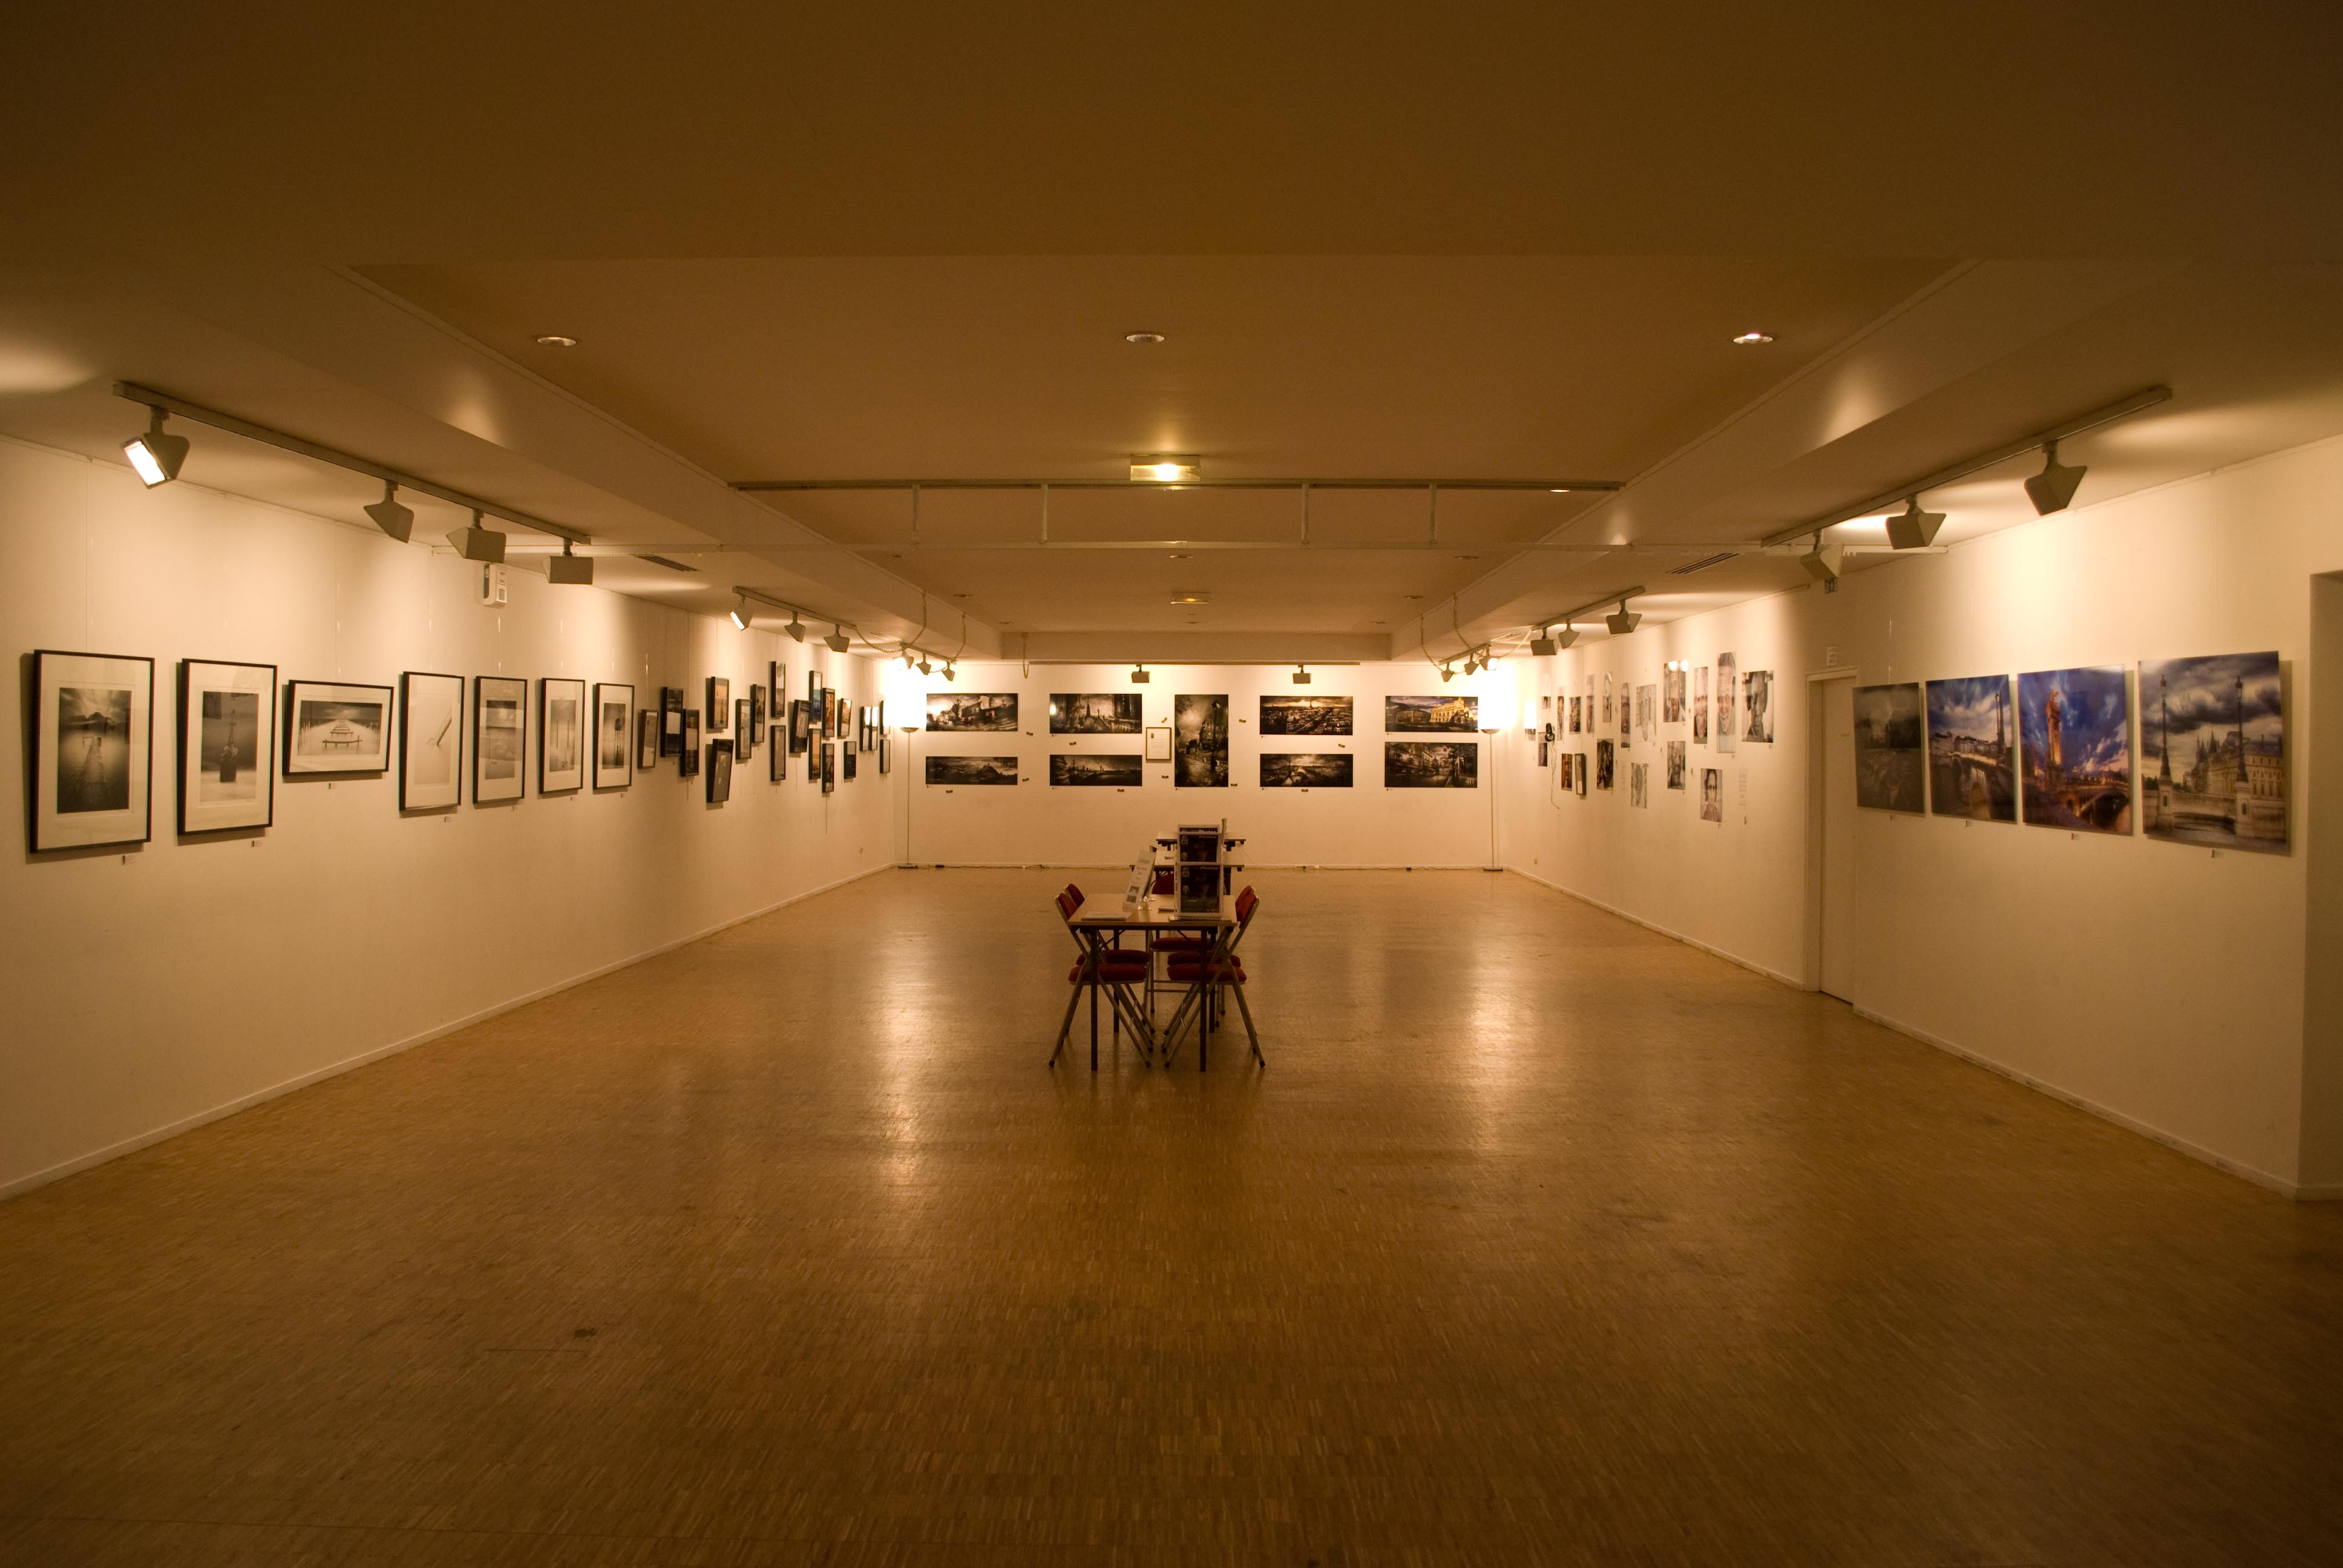 'Silence must be heard' exhibition in 2010